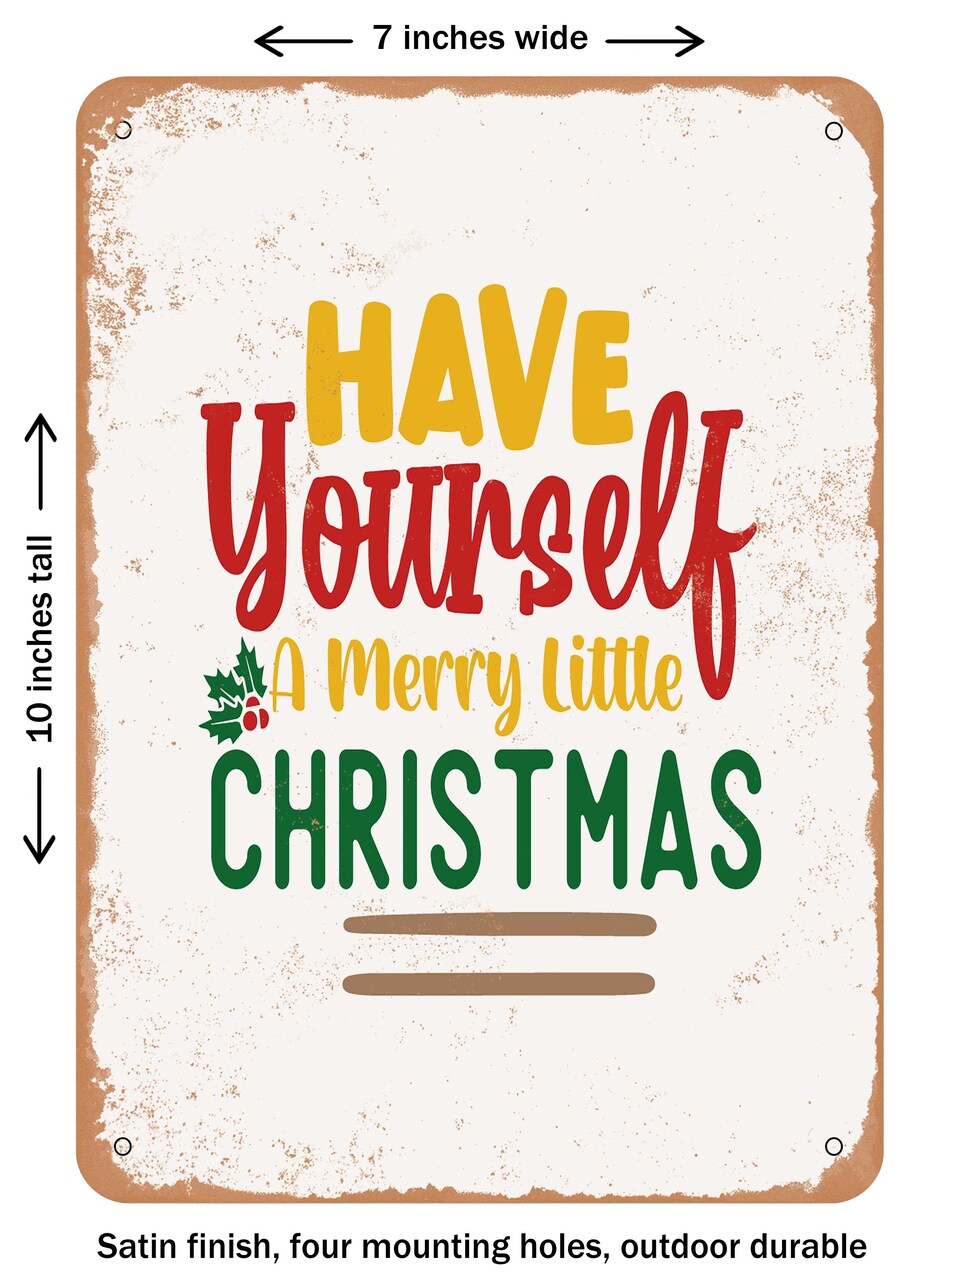 DECORATIVE METAL SIGN - Have Yourself a Merry Little Christmas  - Vintage Rusty Look